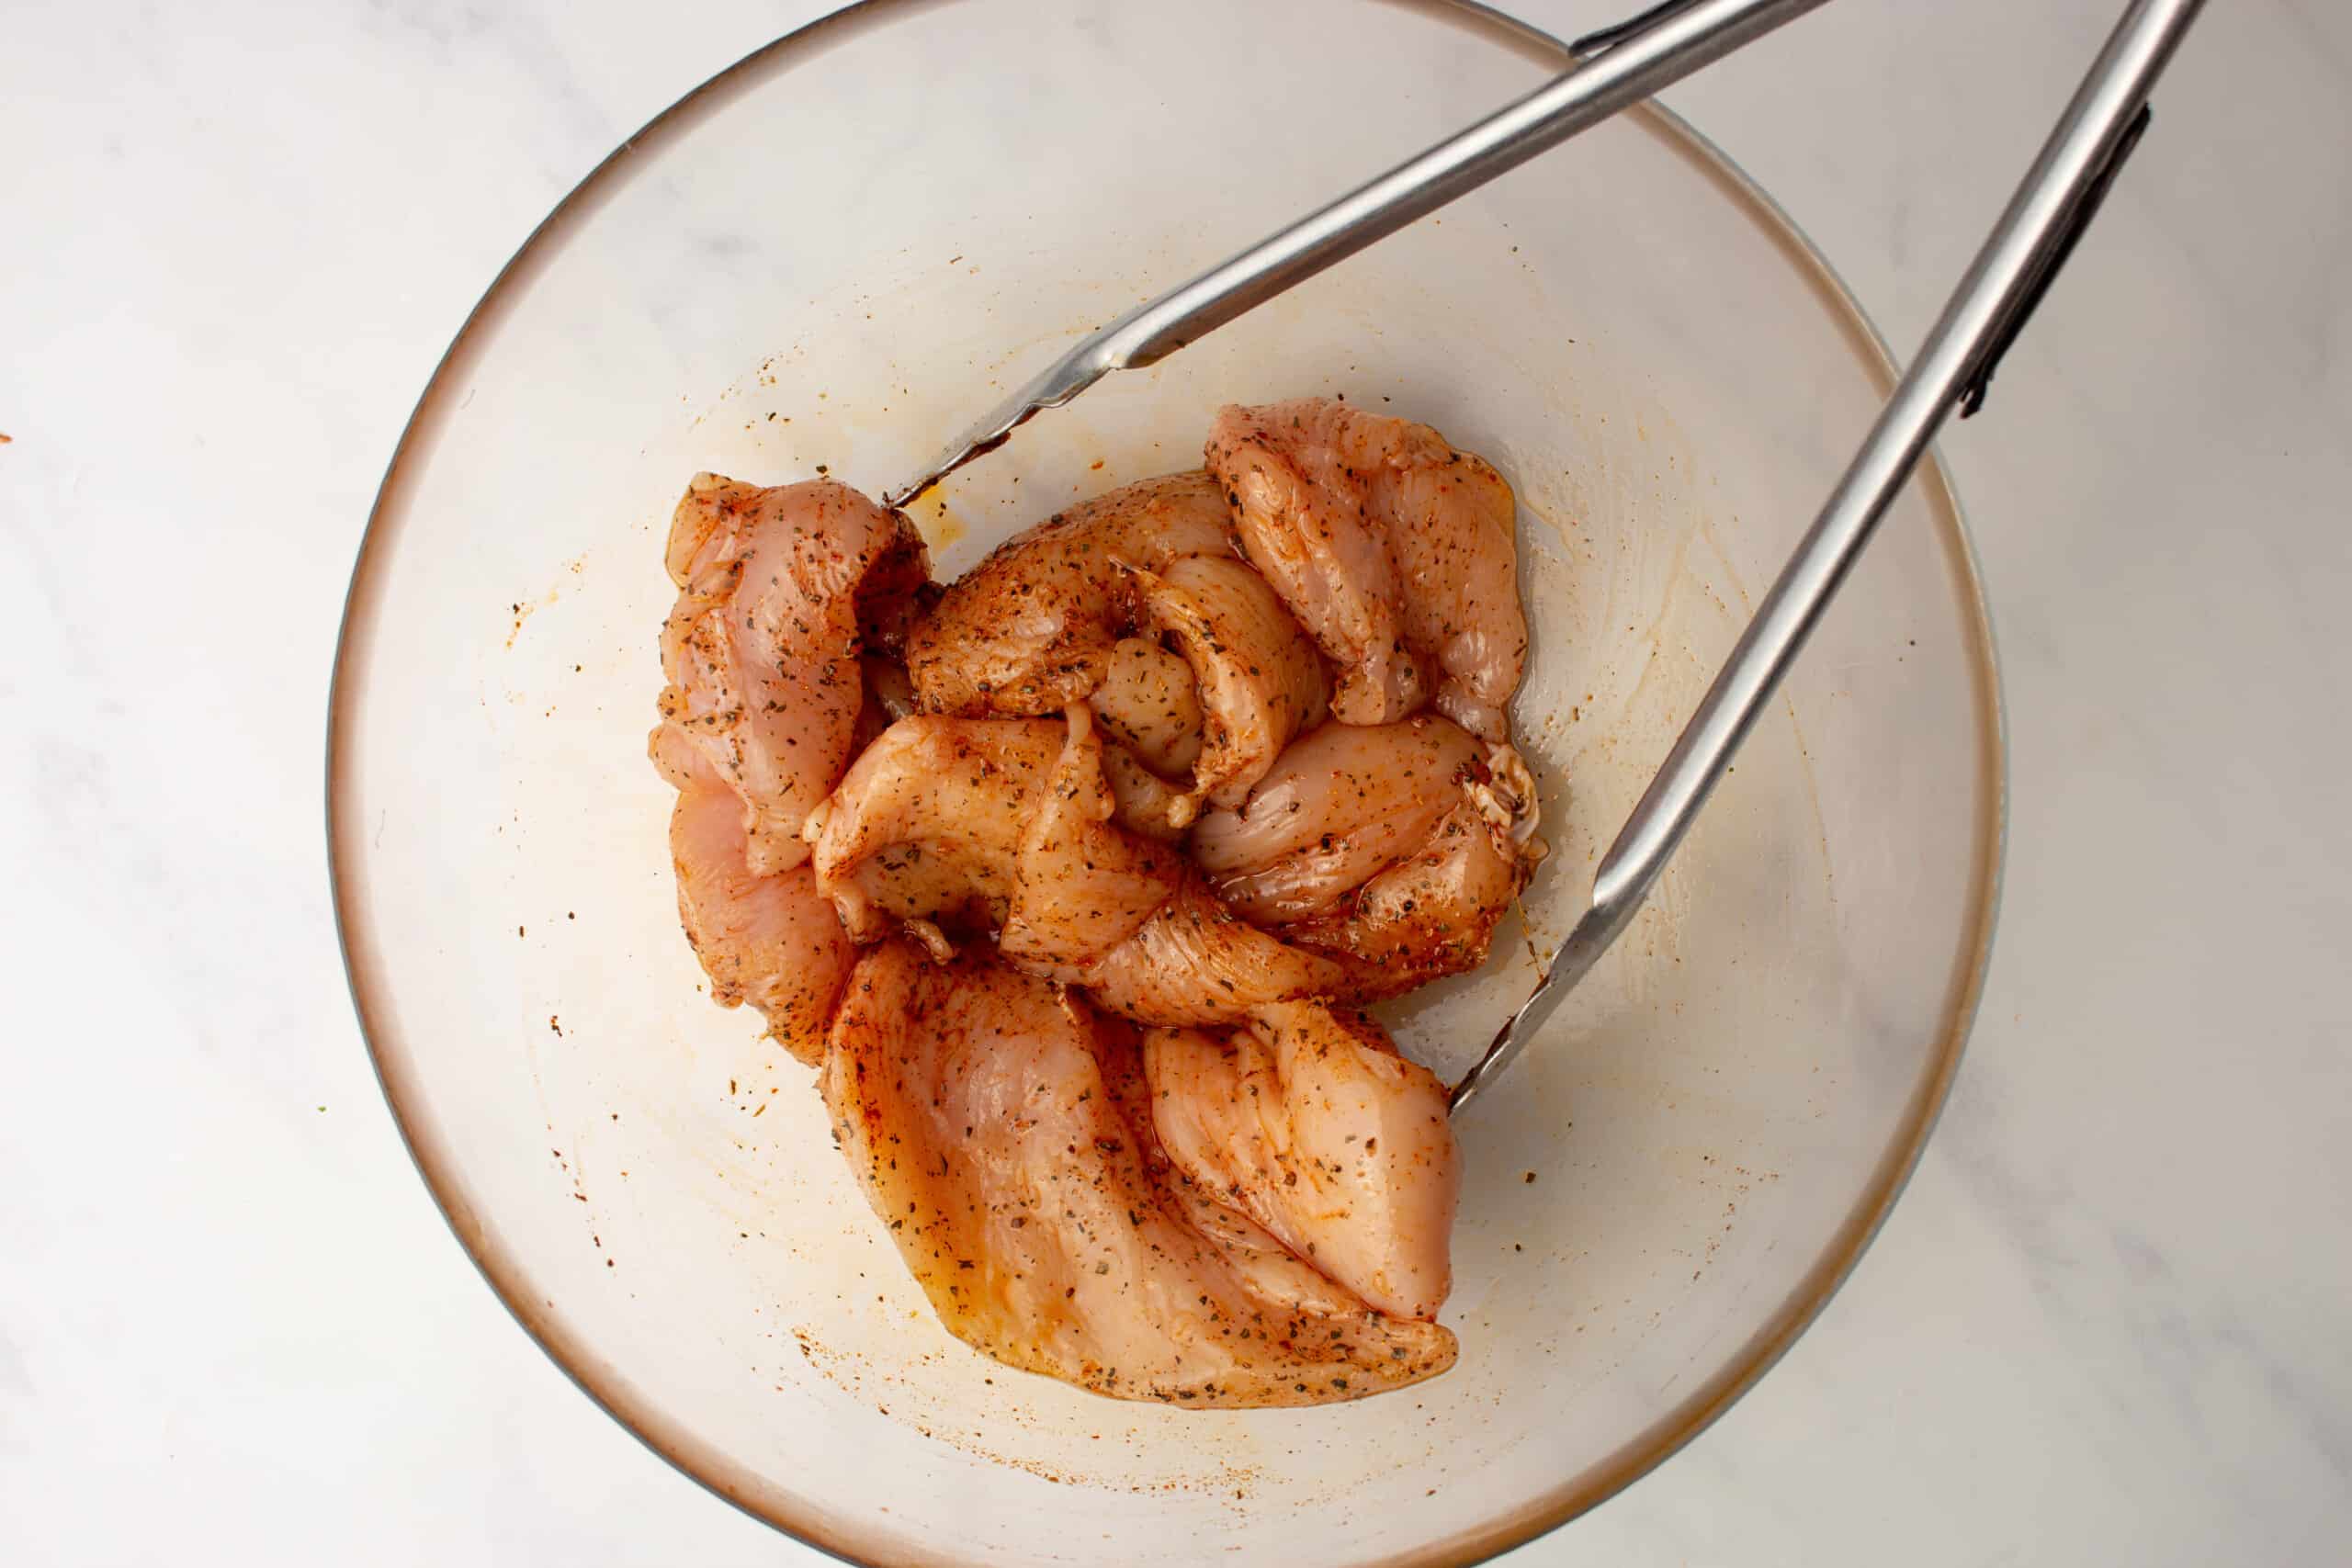 Chicken breast pieces in a glass bowl coated with Cajun spices and mixed with metal tongs.